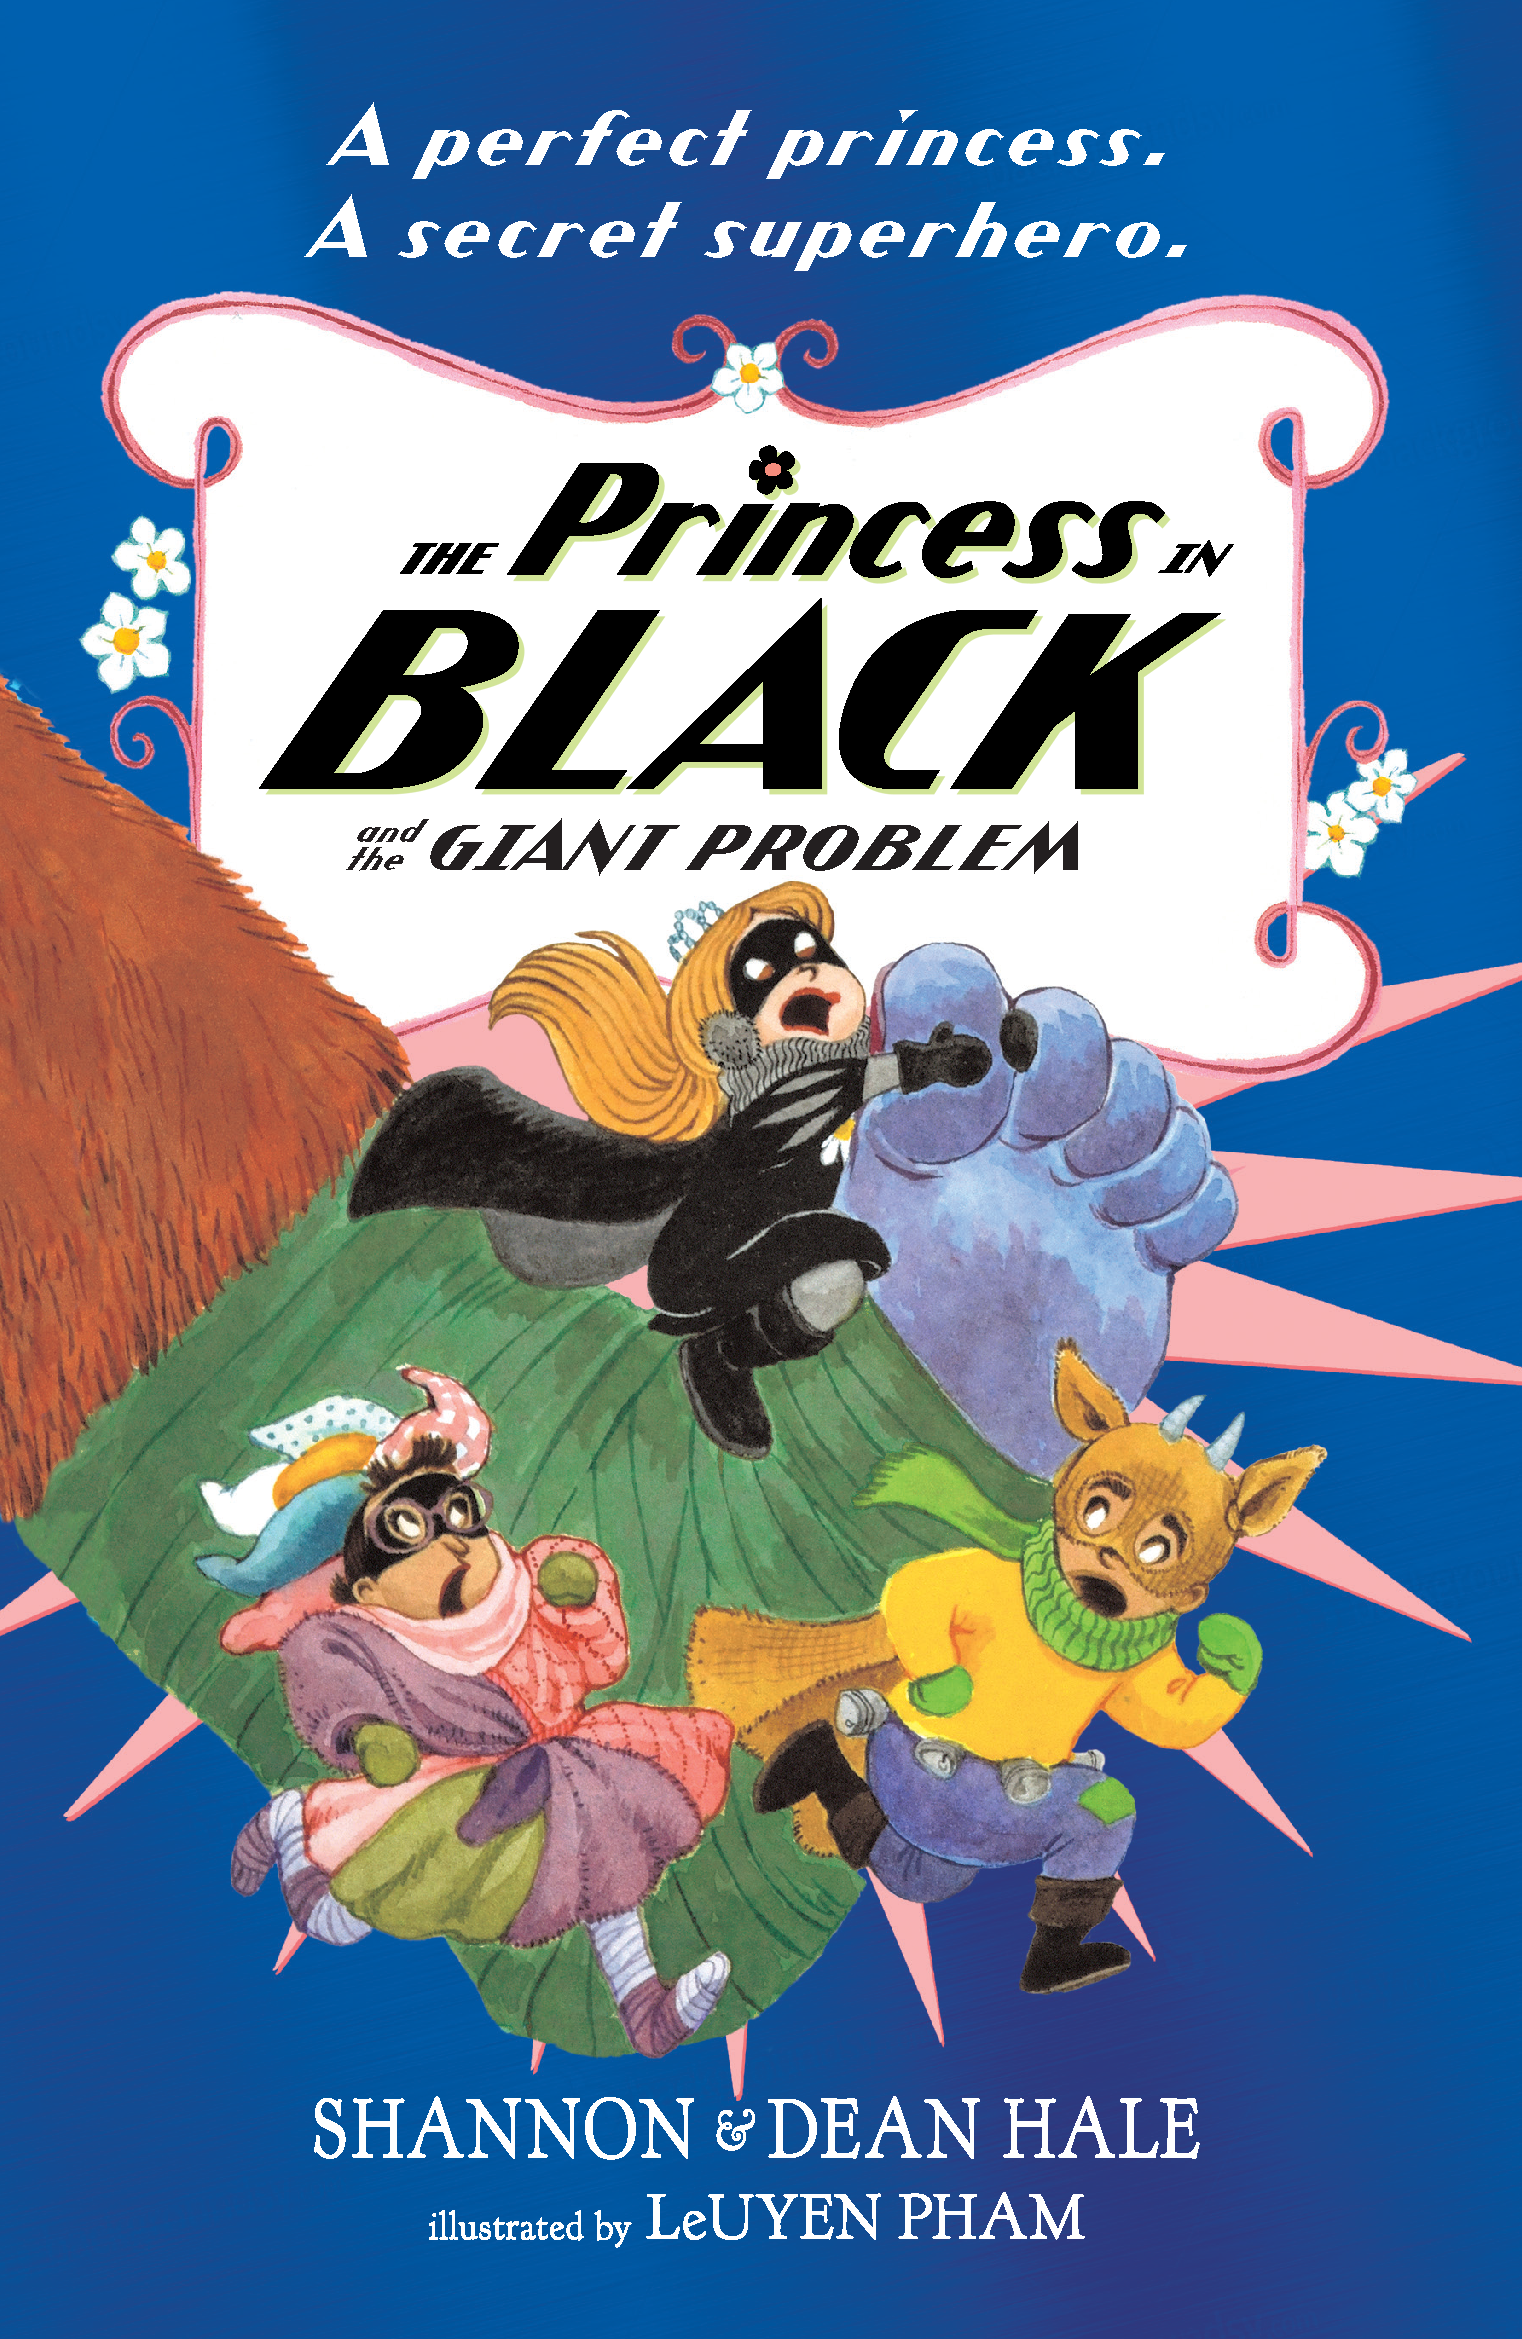 The-Princess-in-Black-and-the-Giant-Problem